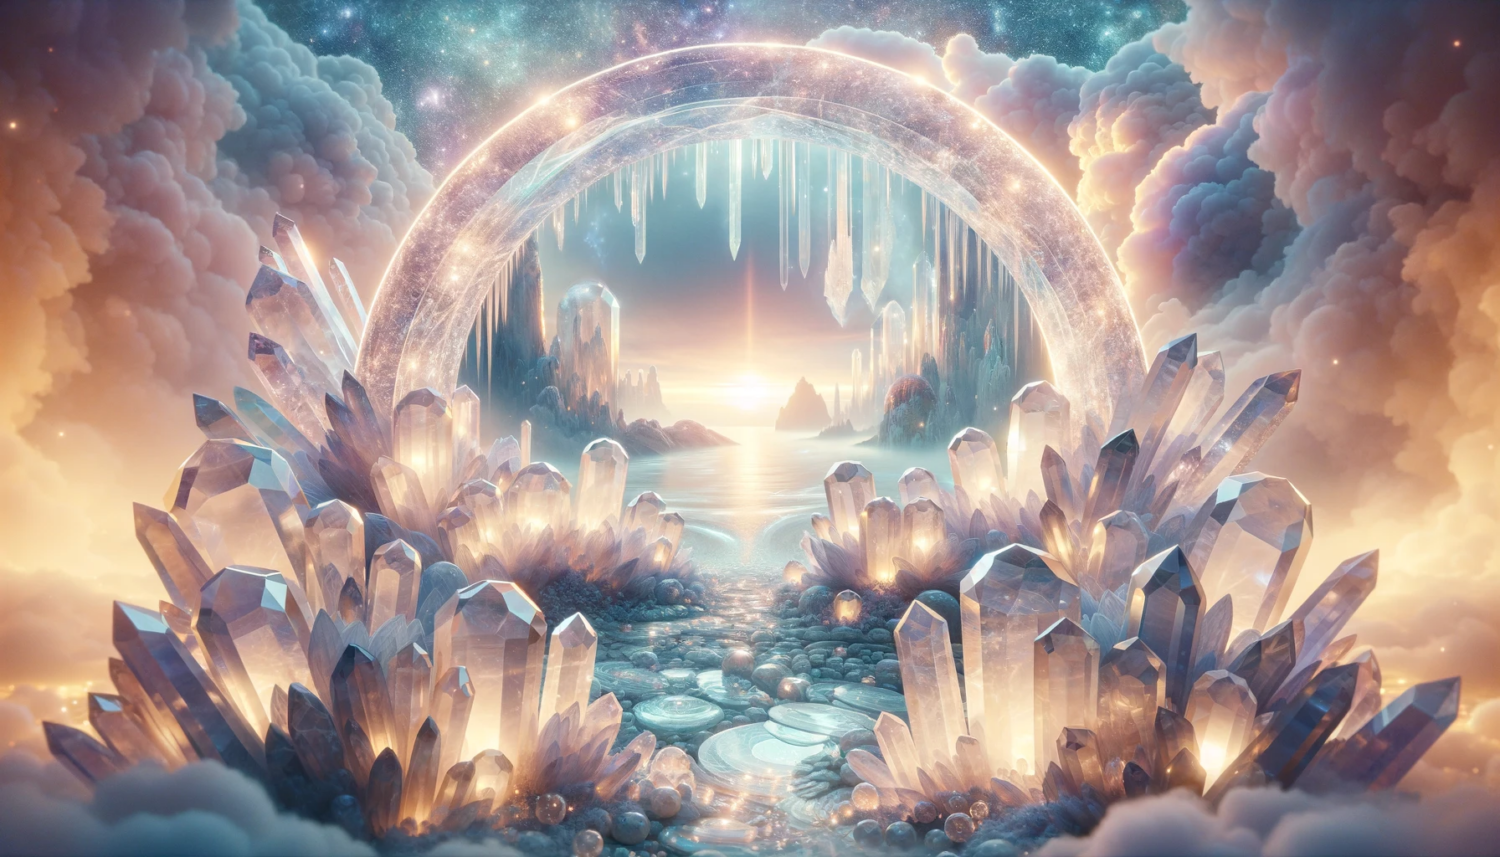 A metaphysical scene featuring petalite crystals as a bridge to another realm. The image should have an ethereal, otherworldly quality, with petalite crystals in the foreground, appearing translucent and shimmering. They should be forming an arch or pathway leading to a mystical realm in the background, which is visible through the crystal arch. The realm should be fantastical, filled with soft, glowing light, and ethereal landscapes. The color palette should be soft and light, with pastel tones dominating the scene. The overall atmosphere should be serene and magical, evoking a sense of wonder and tranquility.